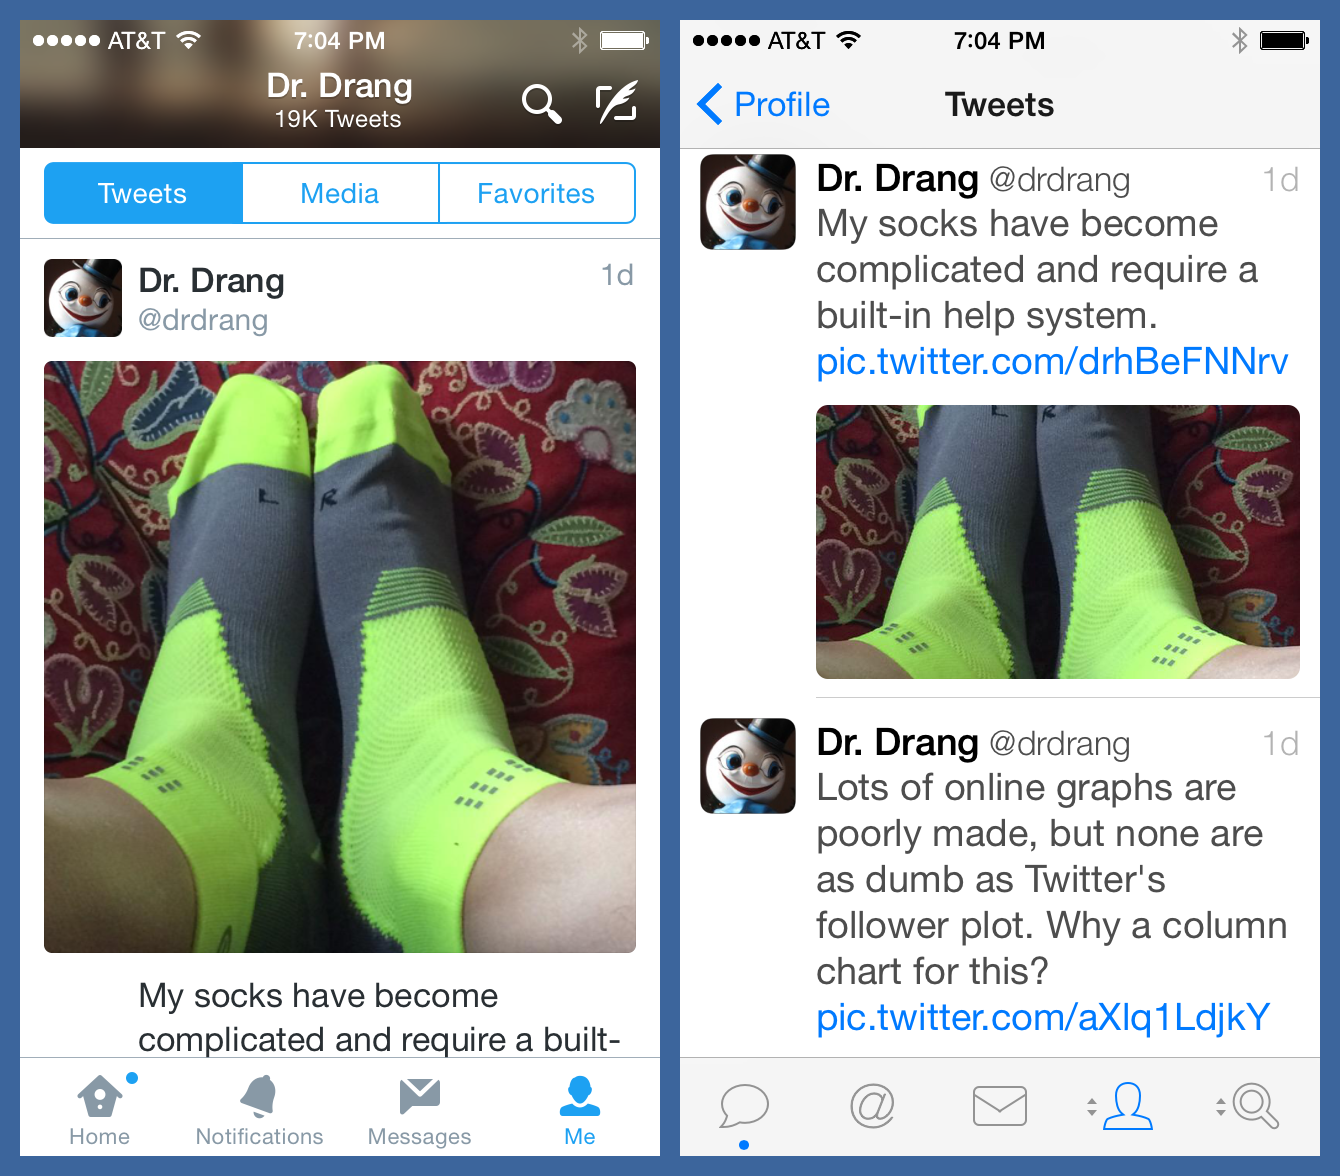 Twitter and Tweetbot images